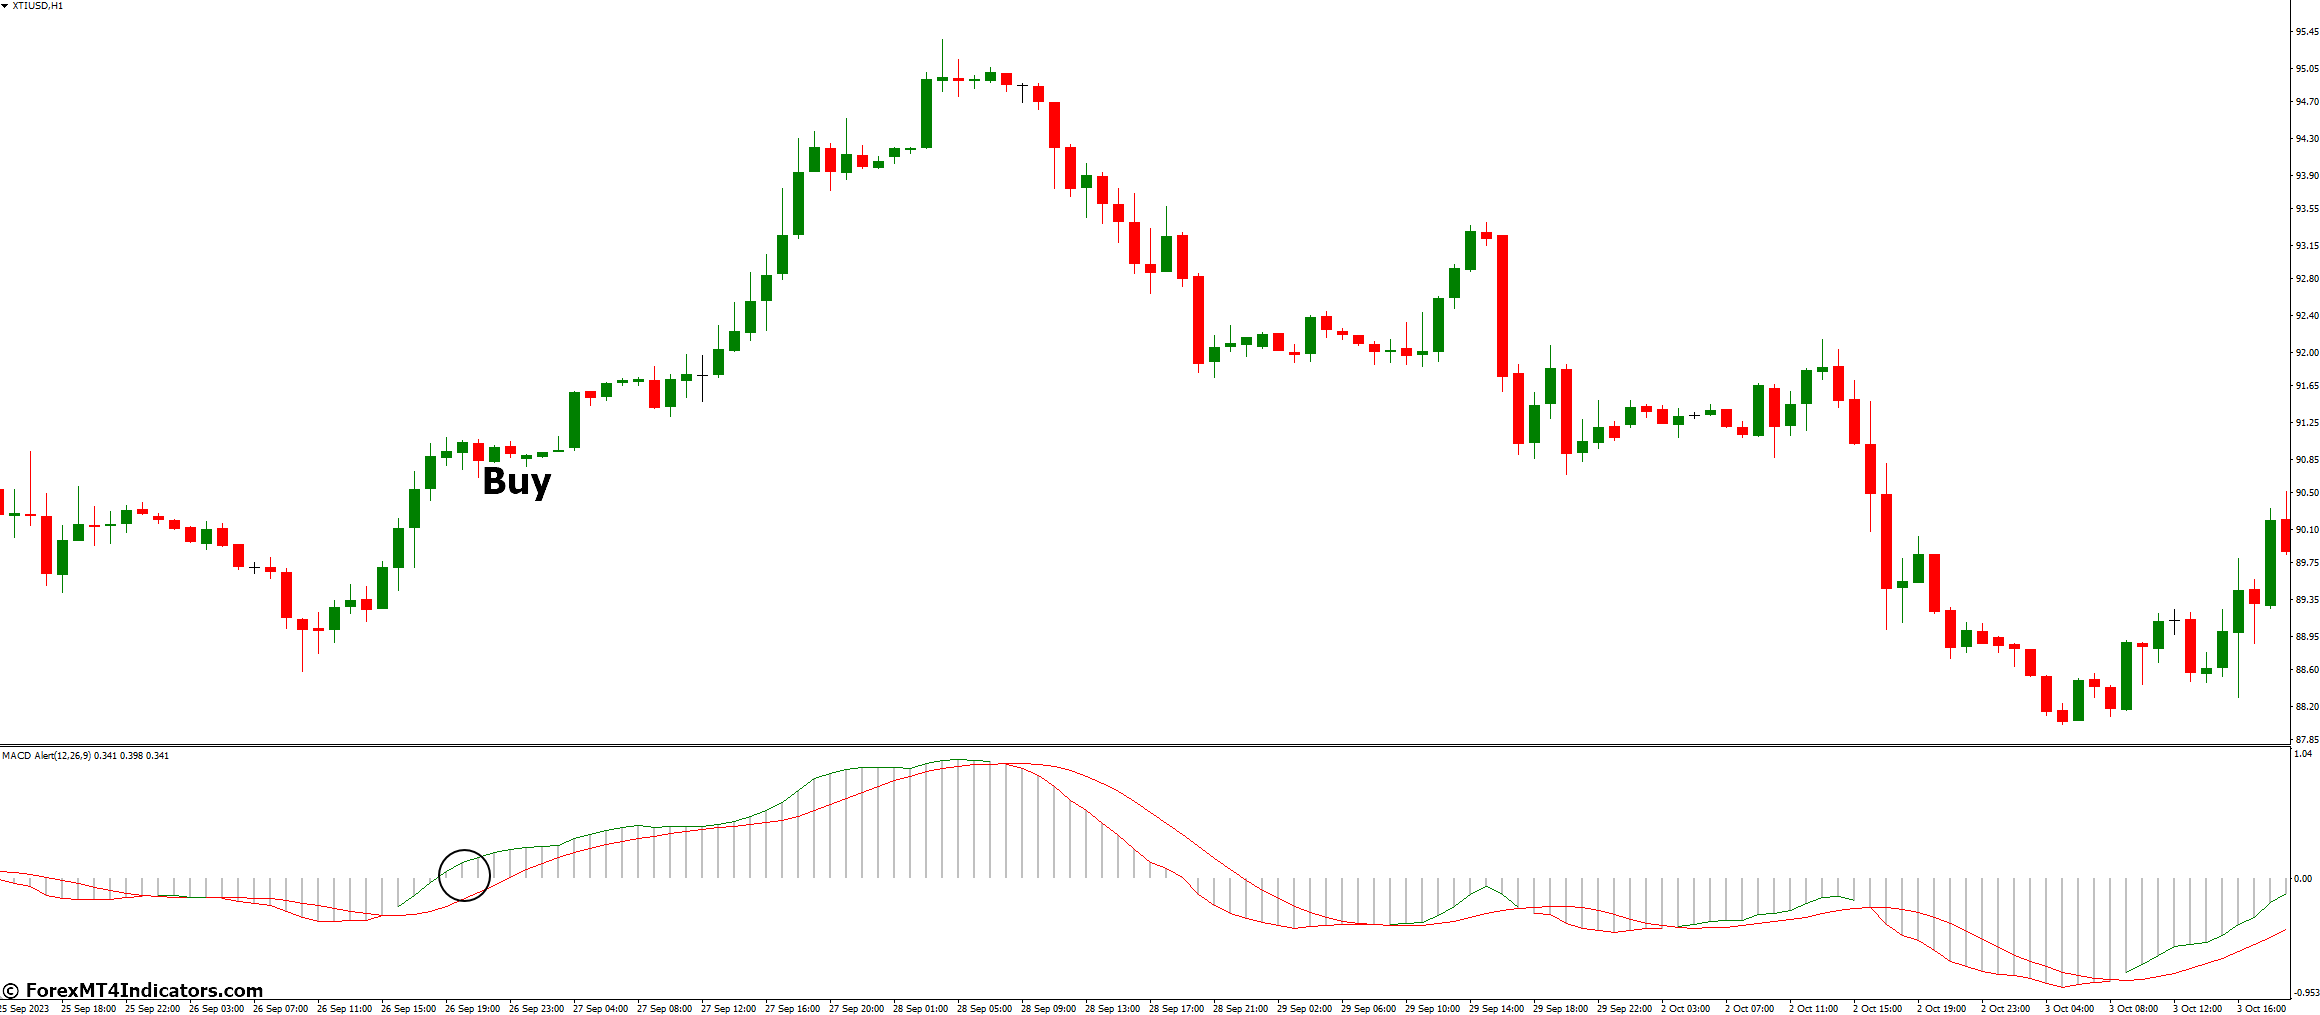 How to Trade with MACD Alert Indicator - Buy Entry